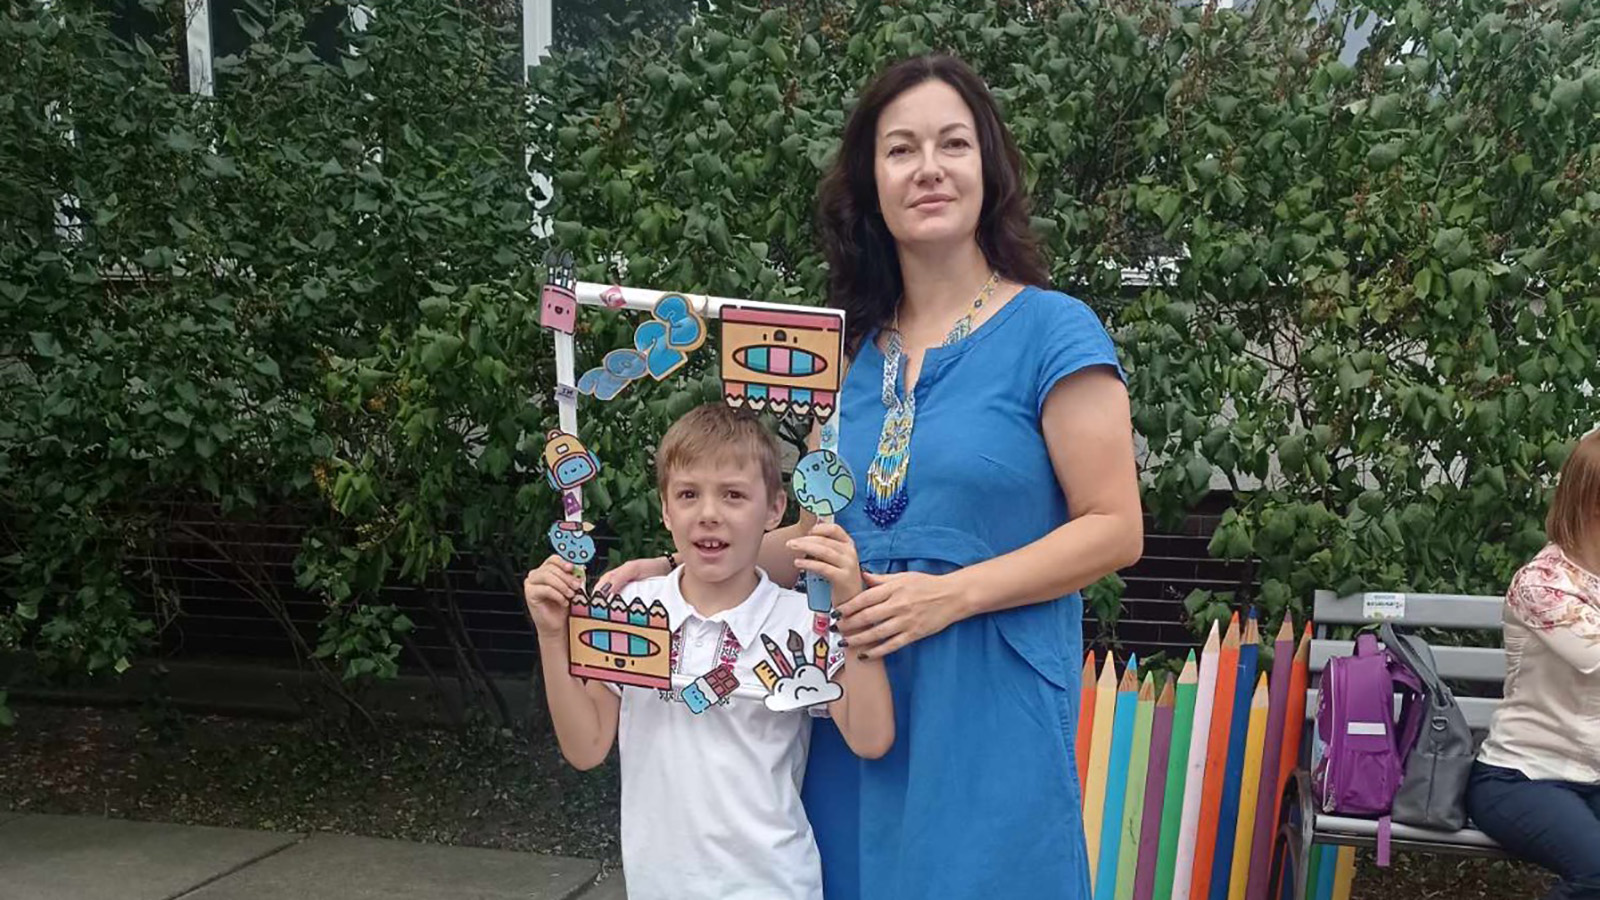 Kateryna Pylypenko pictured with her son on his first day of school on Friday.